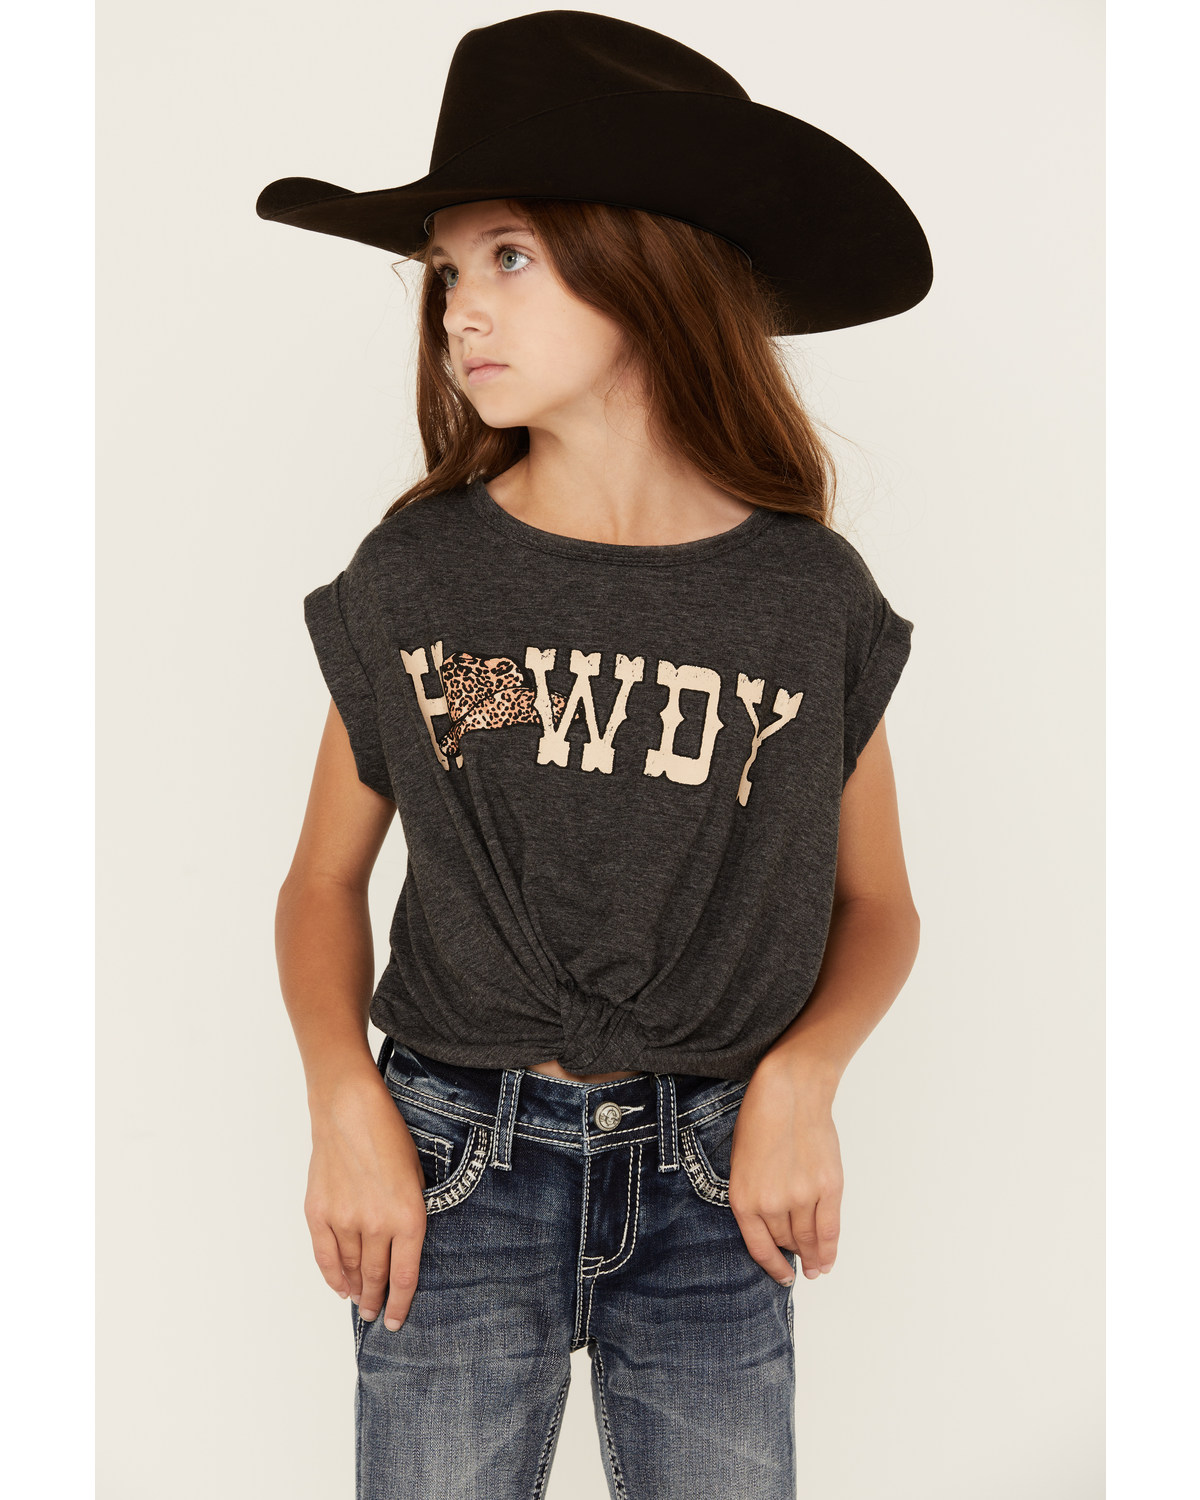 Saints & Hearts Girls' Howdy Tie Front Short Sleeve Graphic Tee